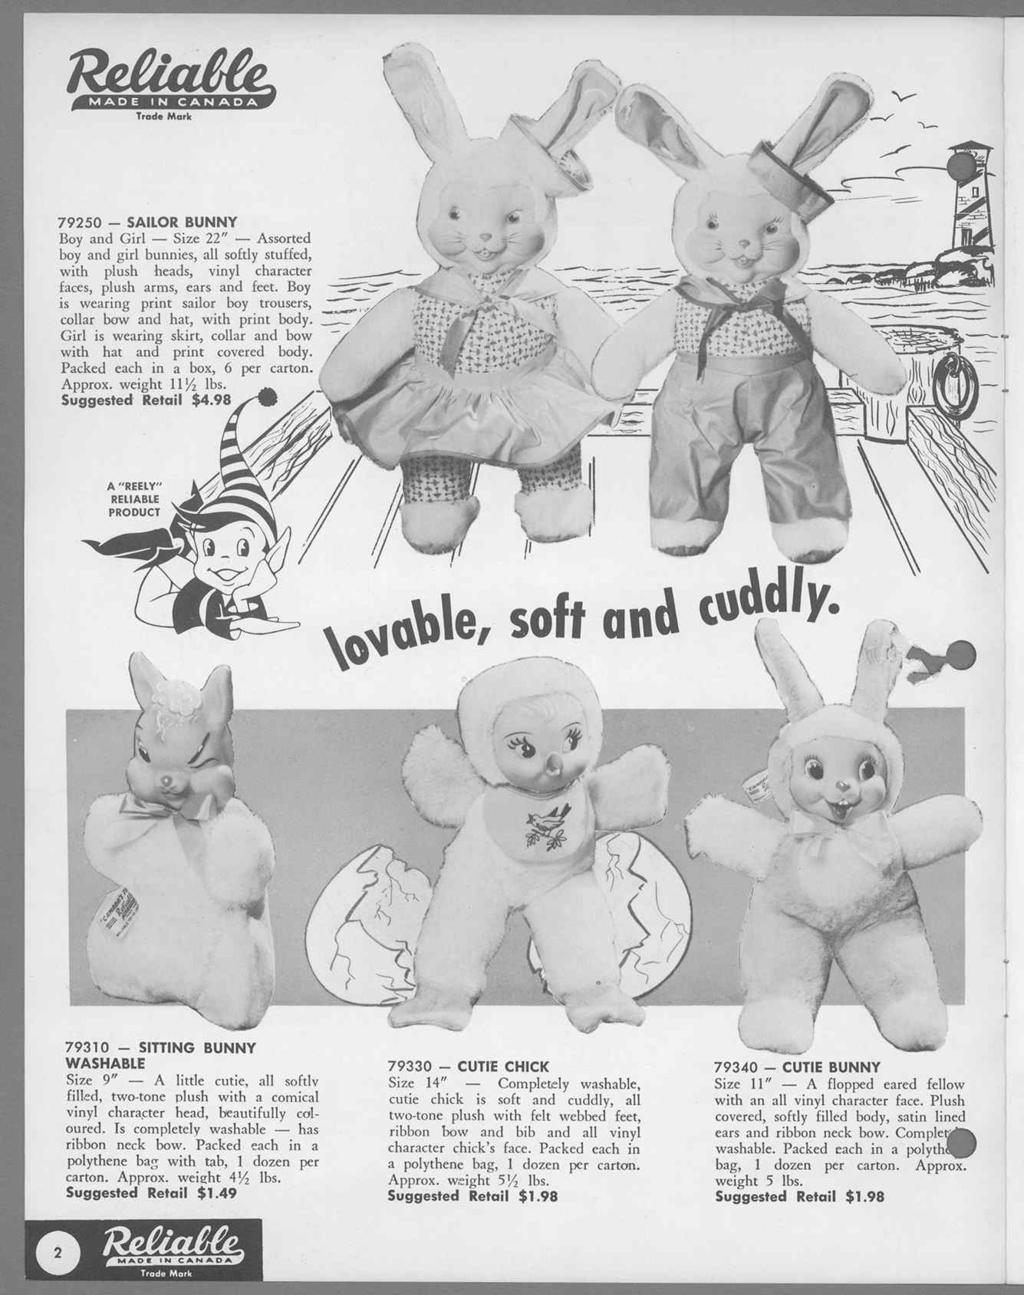 MADE IN CANADA Trade Mark 79250 - SAILOR BUNNY Boy and Girl Size 22" Assorted boy and girl bunnies, all softly stuffed, with plush heads, vinyl character faces, plush arms, ears and feet.